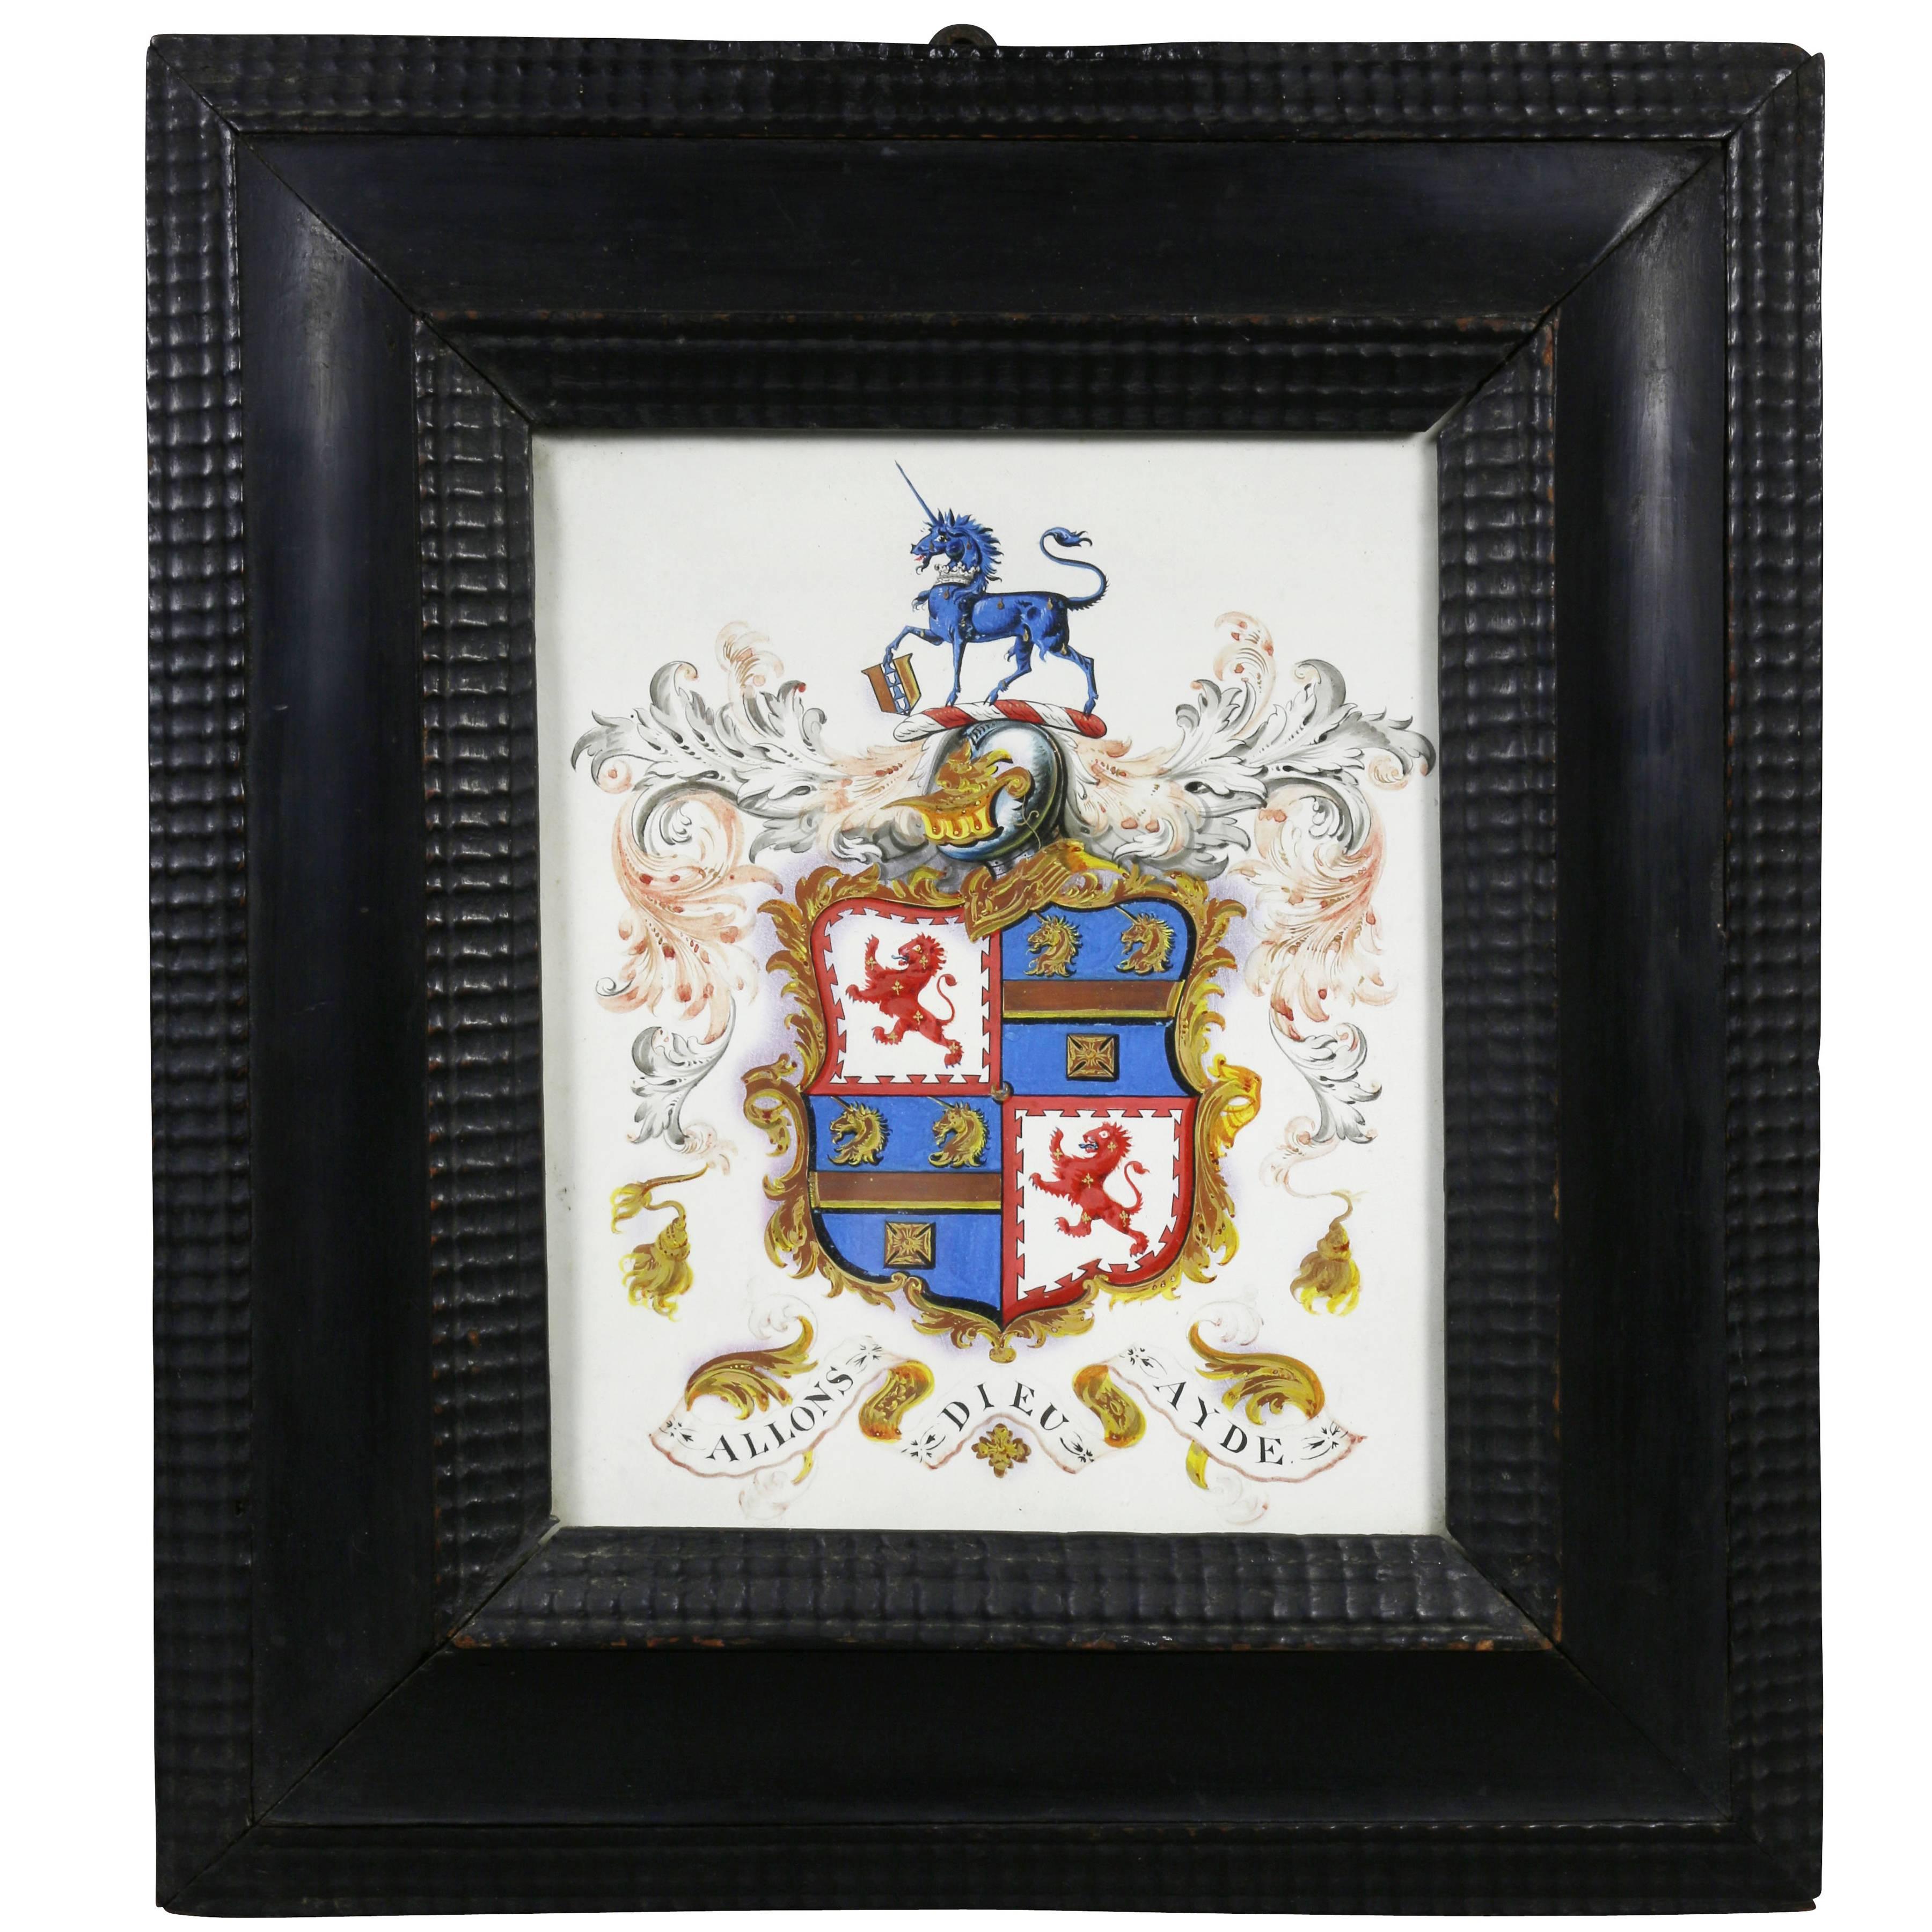 Framed Coat of Arms on Vellum with Flemish Frame